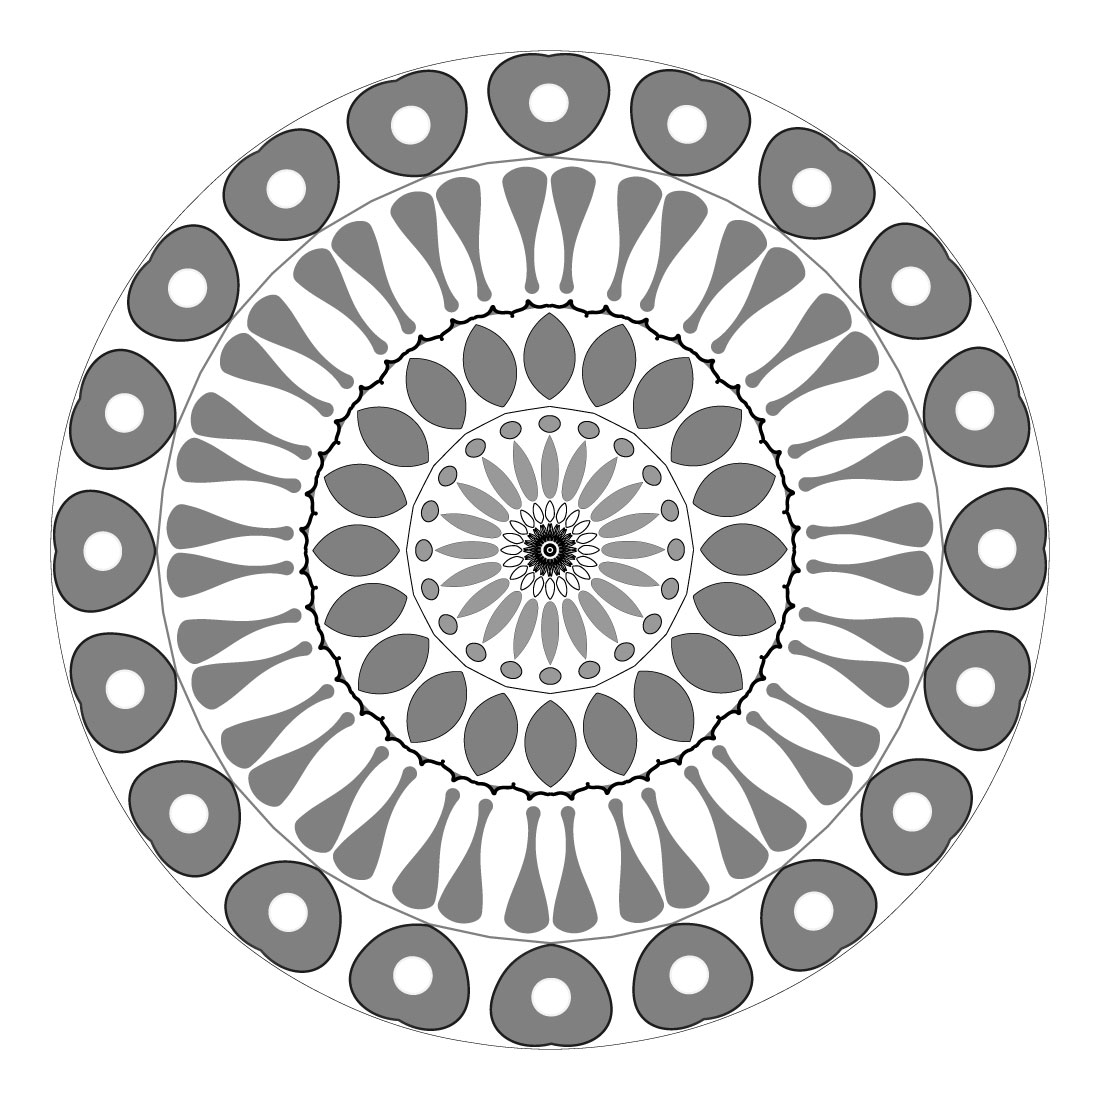 Mandala-art-with-rounded-shados-and-gray-pilers preview image.